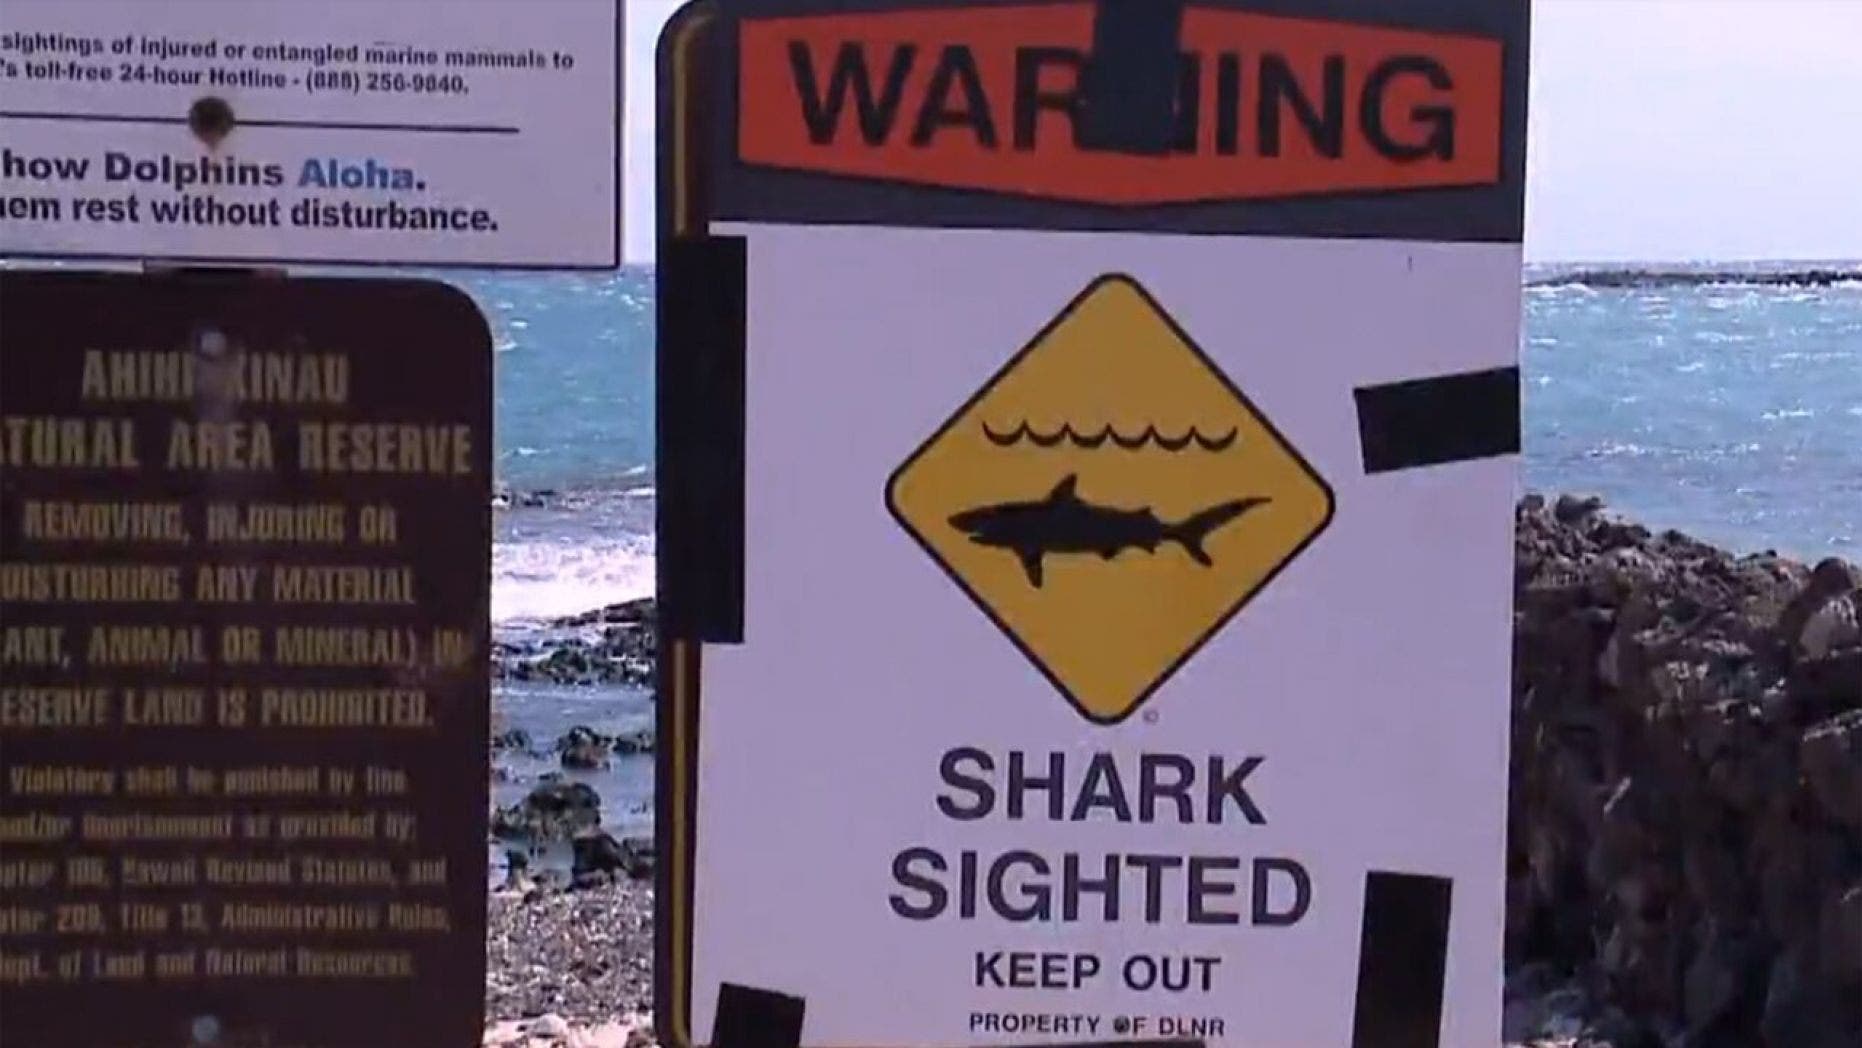 Shark warning signs were posted in the Ka'anapali Beach Park area on Maui after a man was killed in an apparent shark attack on Saturday.